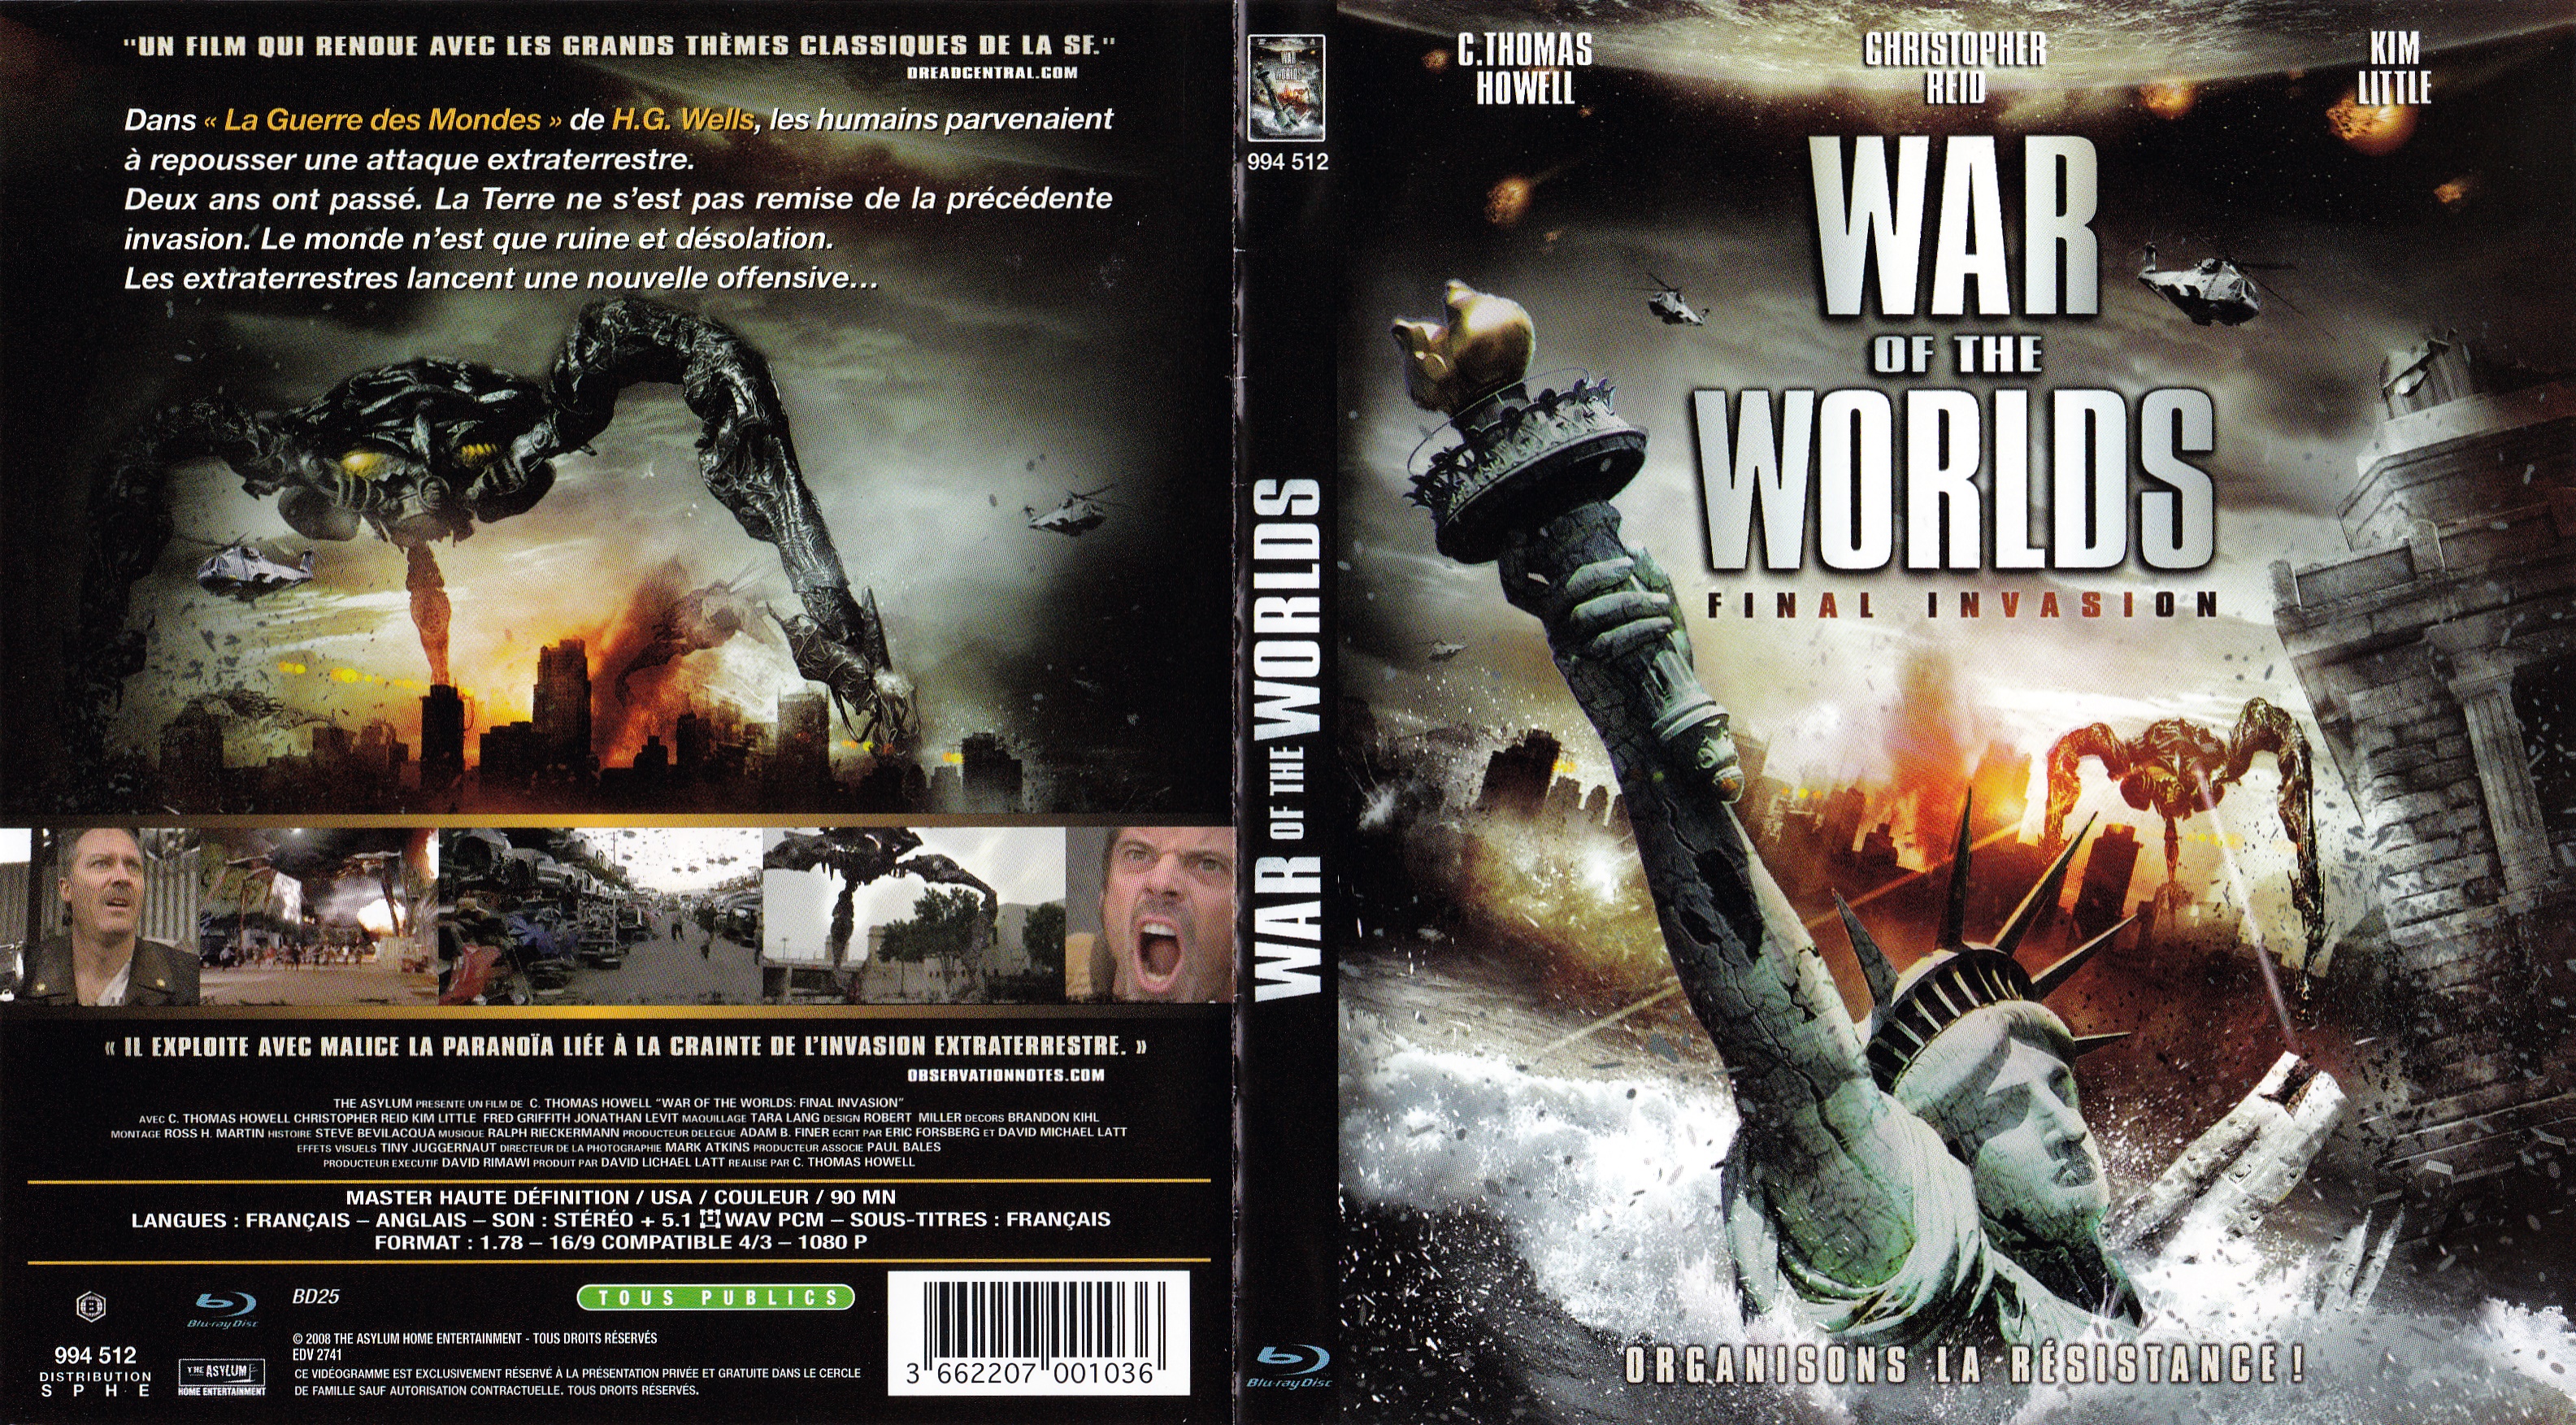 Jaquette DVD War of the worlds Final Invasion (BLU-RAY)